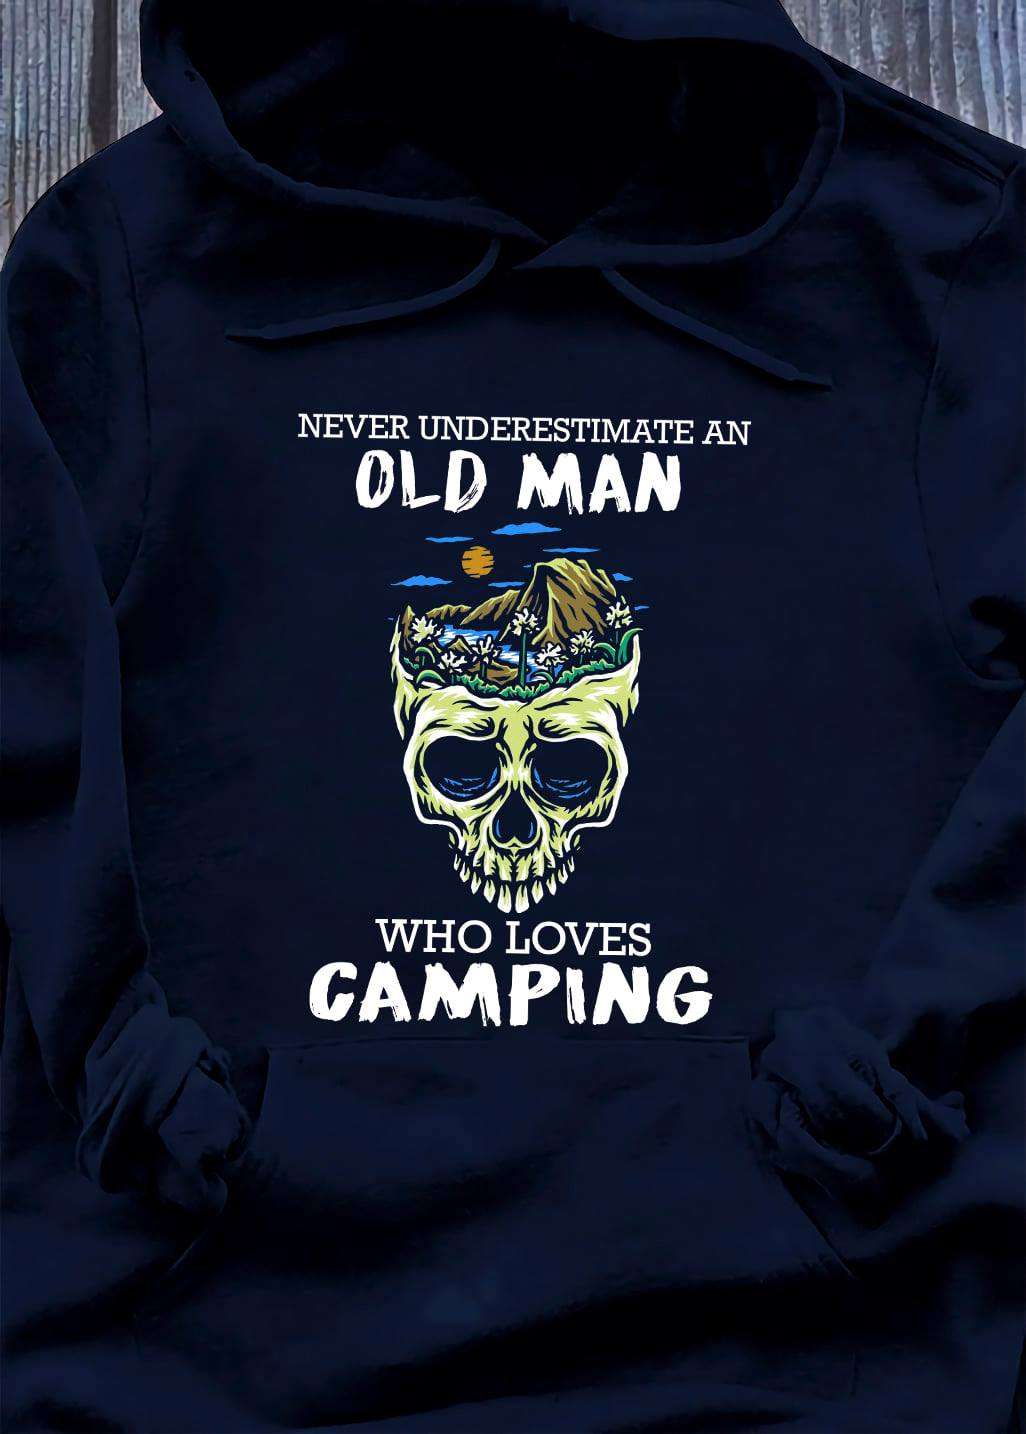 Never underestimate an old man who loves camping - Old man the camper, skull of moutain